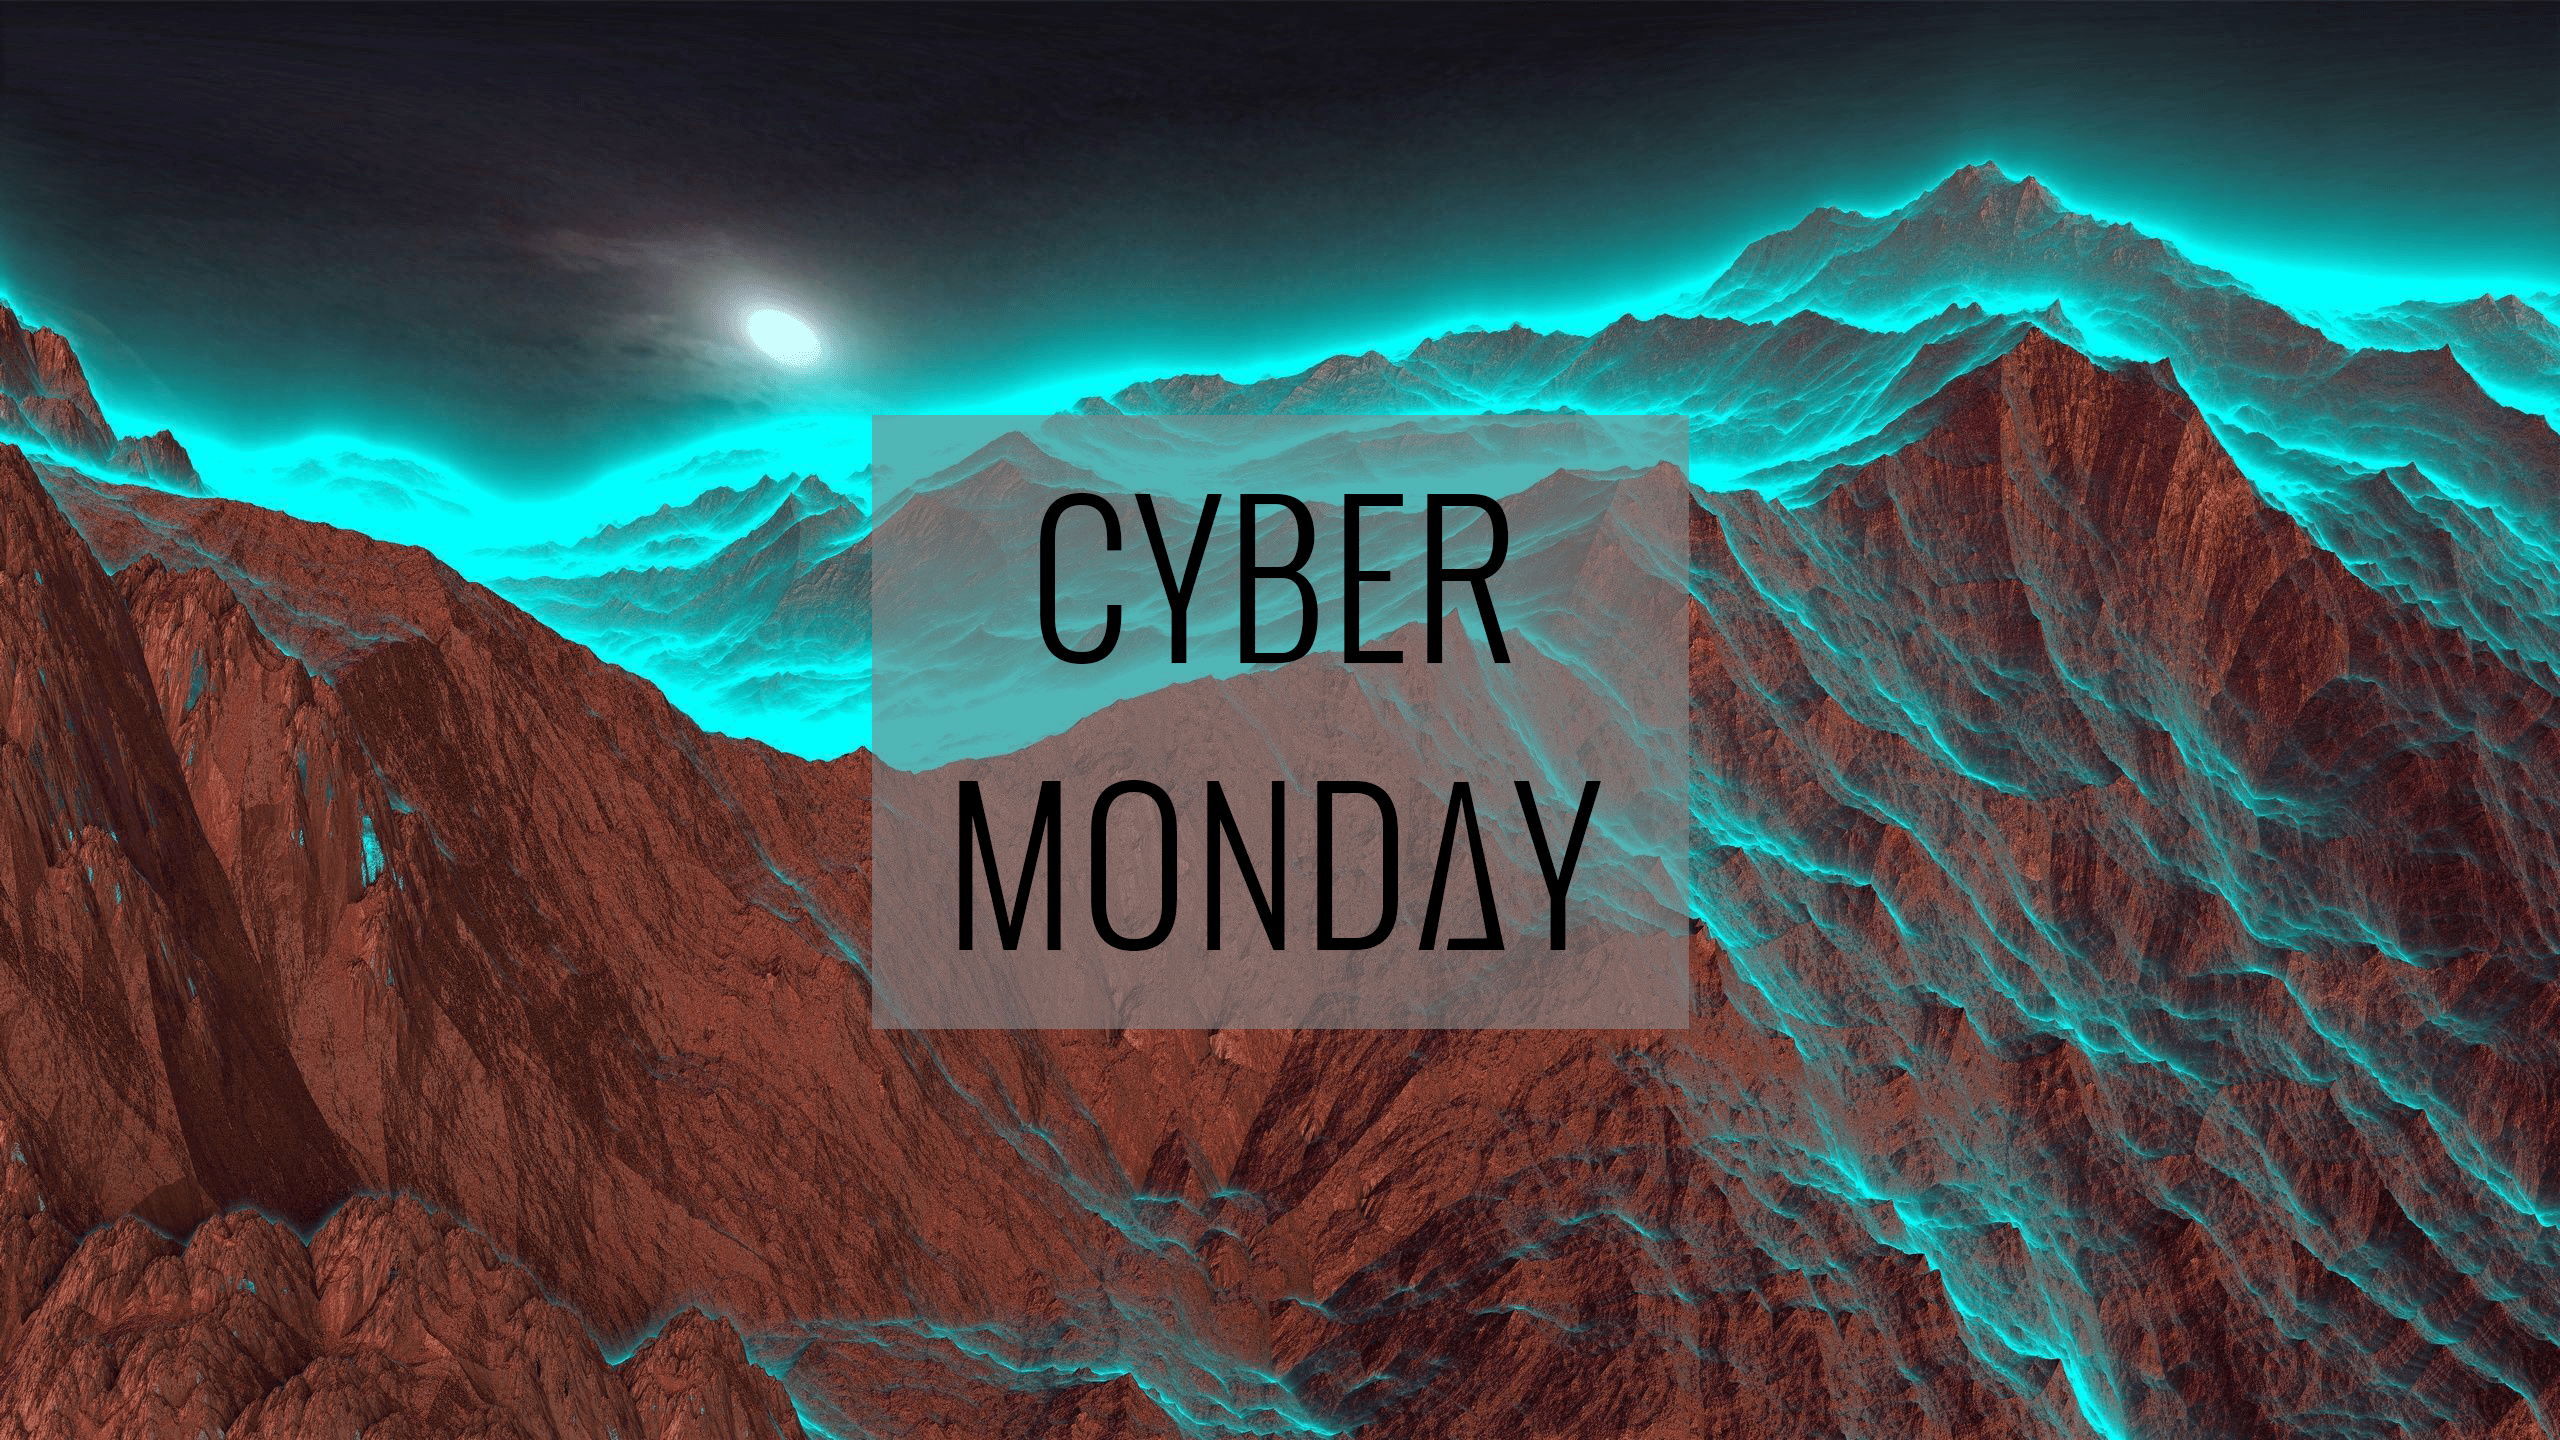 Hack into a deal this #CyberMonday. Be quick, these terminate